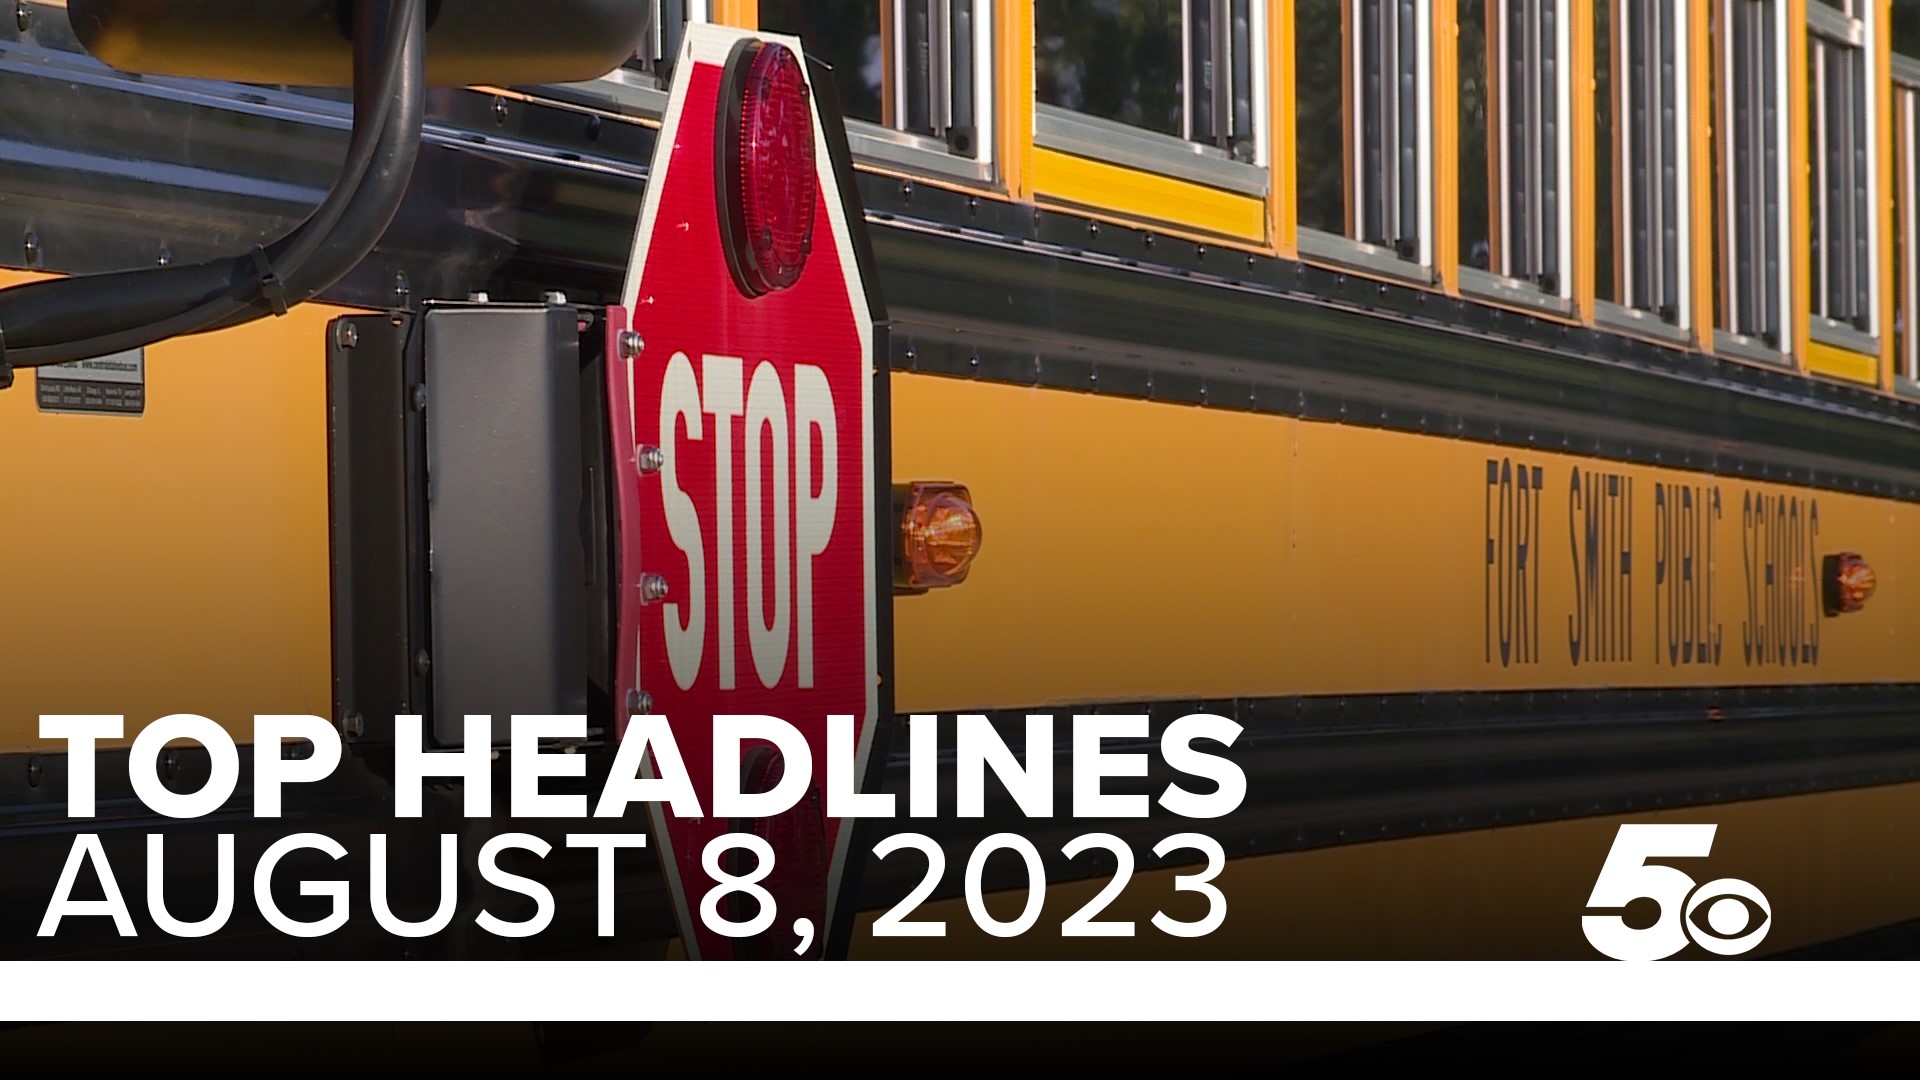 Top headlines for August 8, 2023